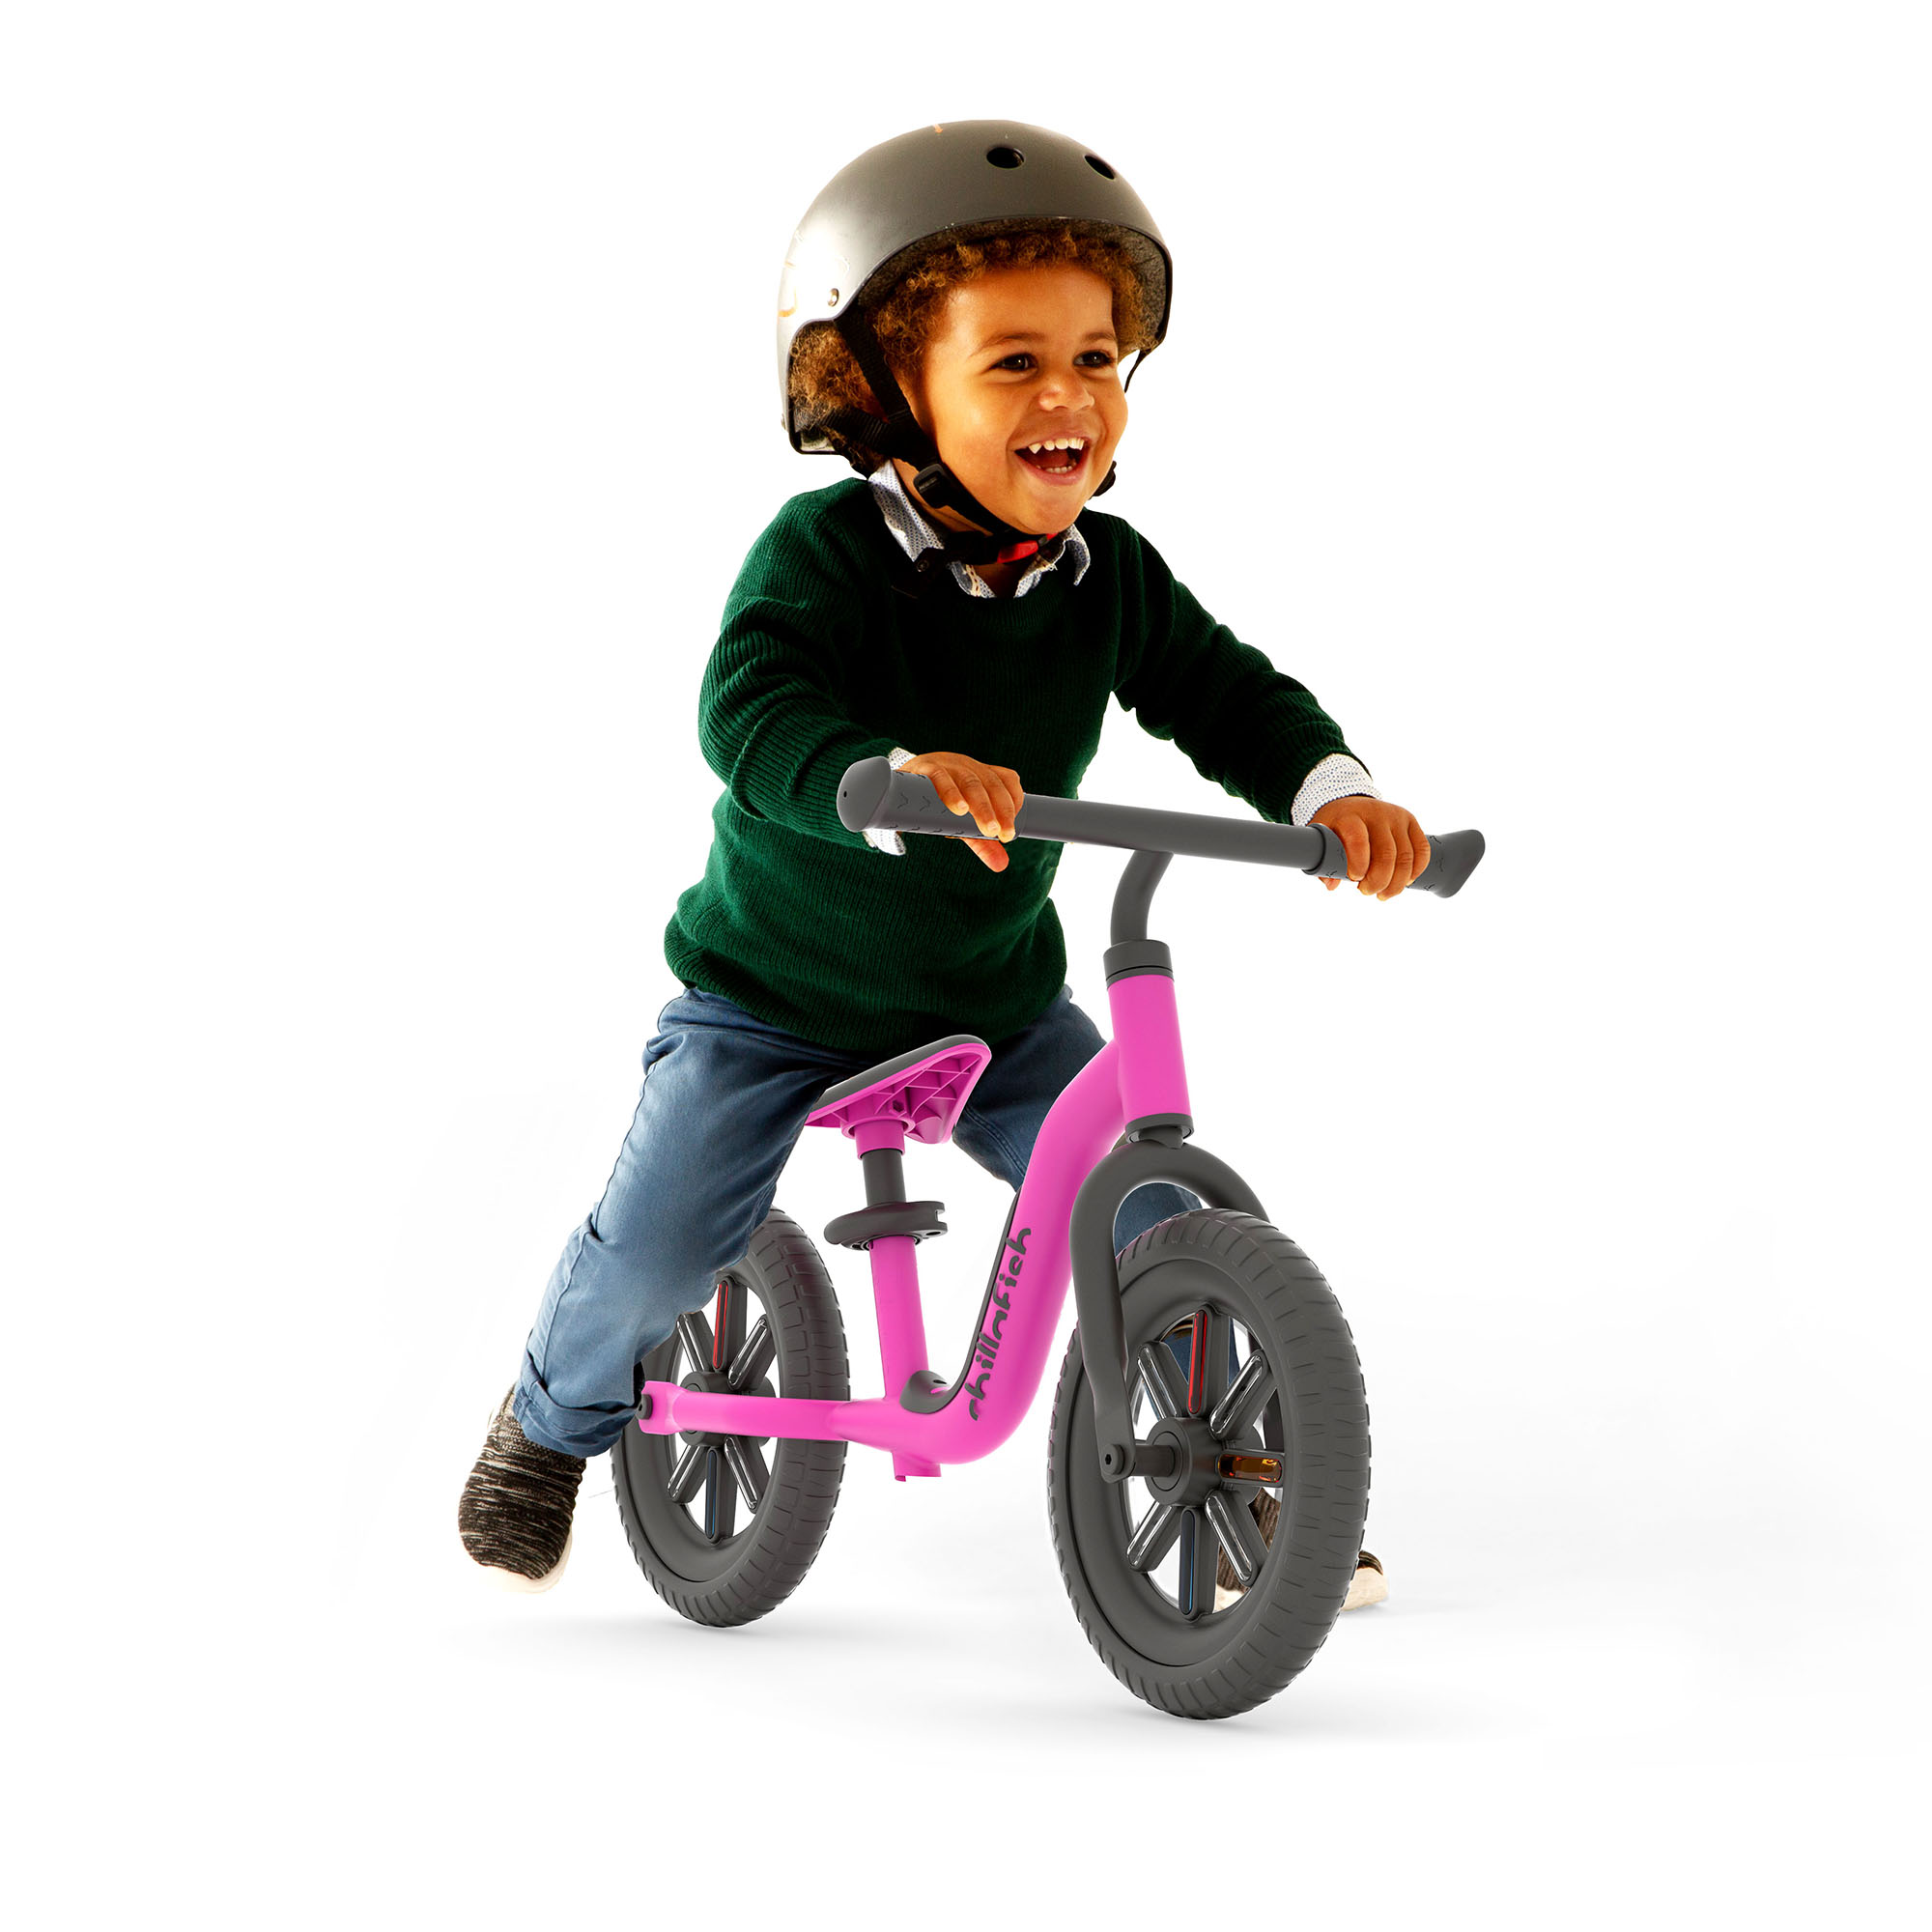 Chillafish Buzzi 10' Balance Bike for Kids 1.5 years and older, Lightweight Toddler Bike with Adjustable Seat - image 4 of 13